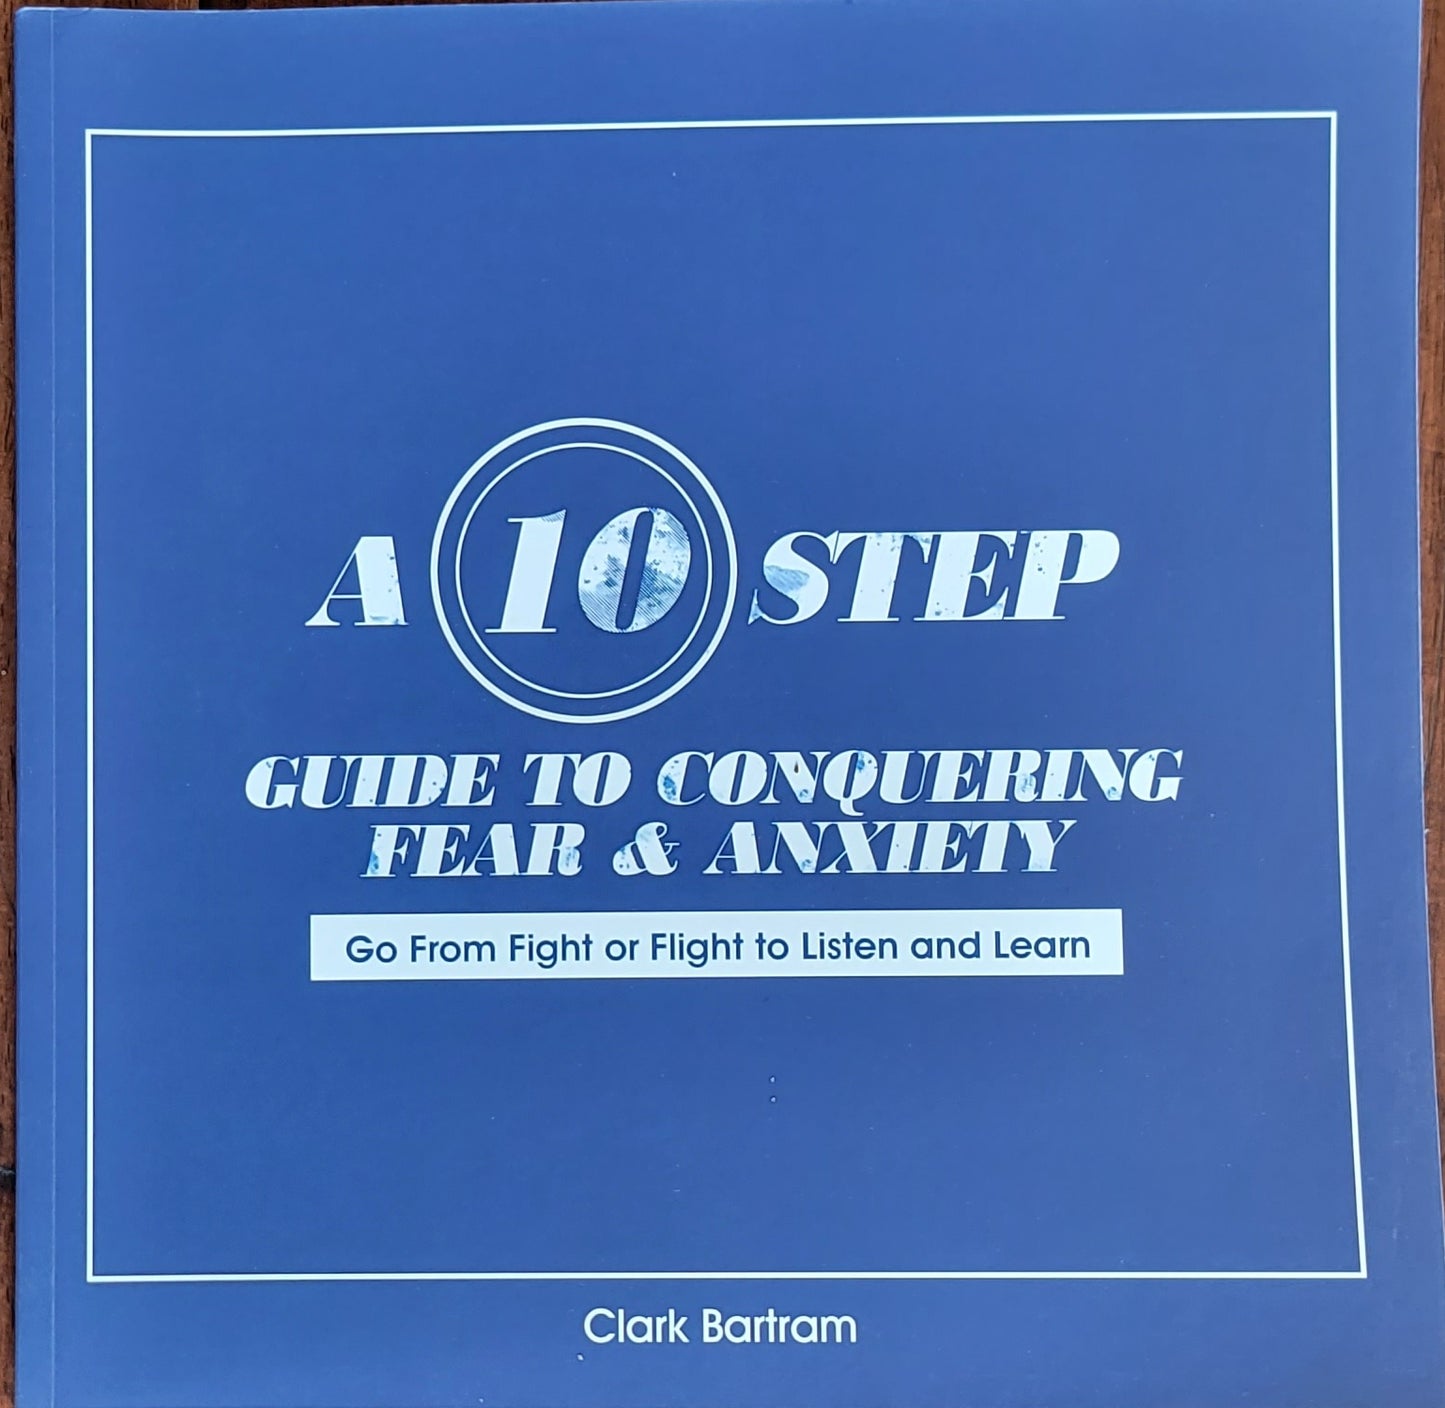 SIGNED-A 10 Step Guide To Conquering Fear & Anxiety: Go From Fight to Flight To Listen and Learn